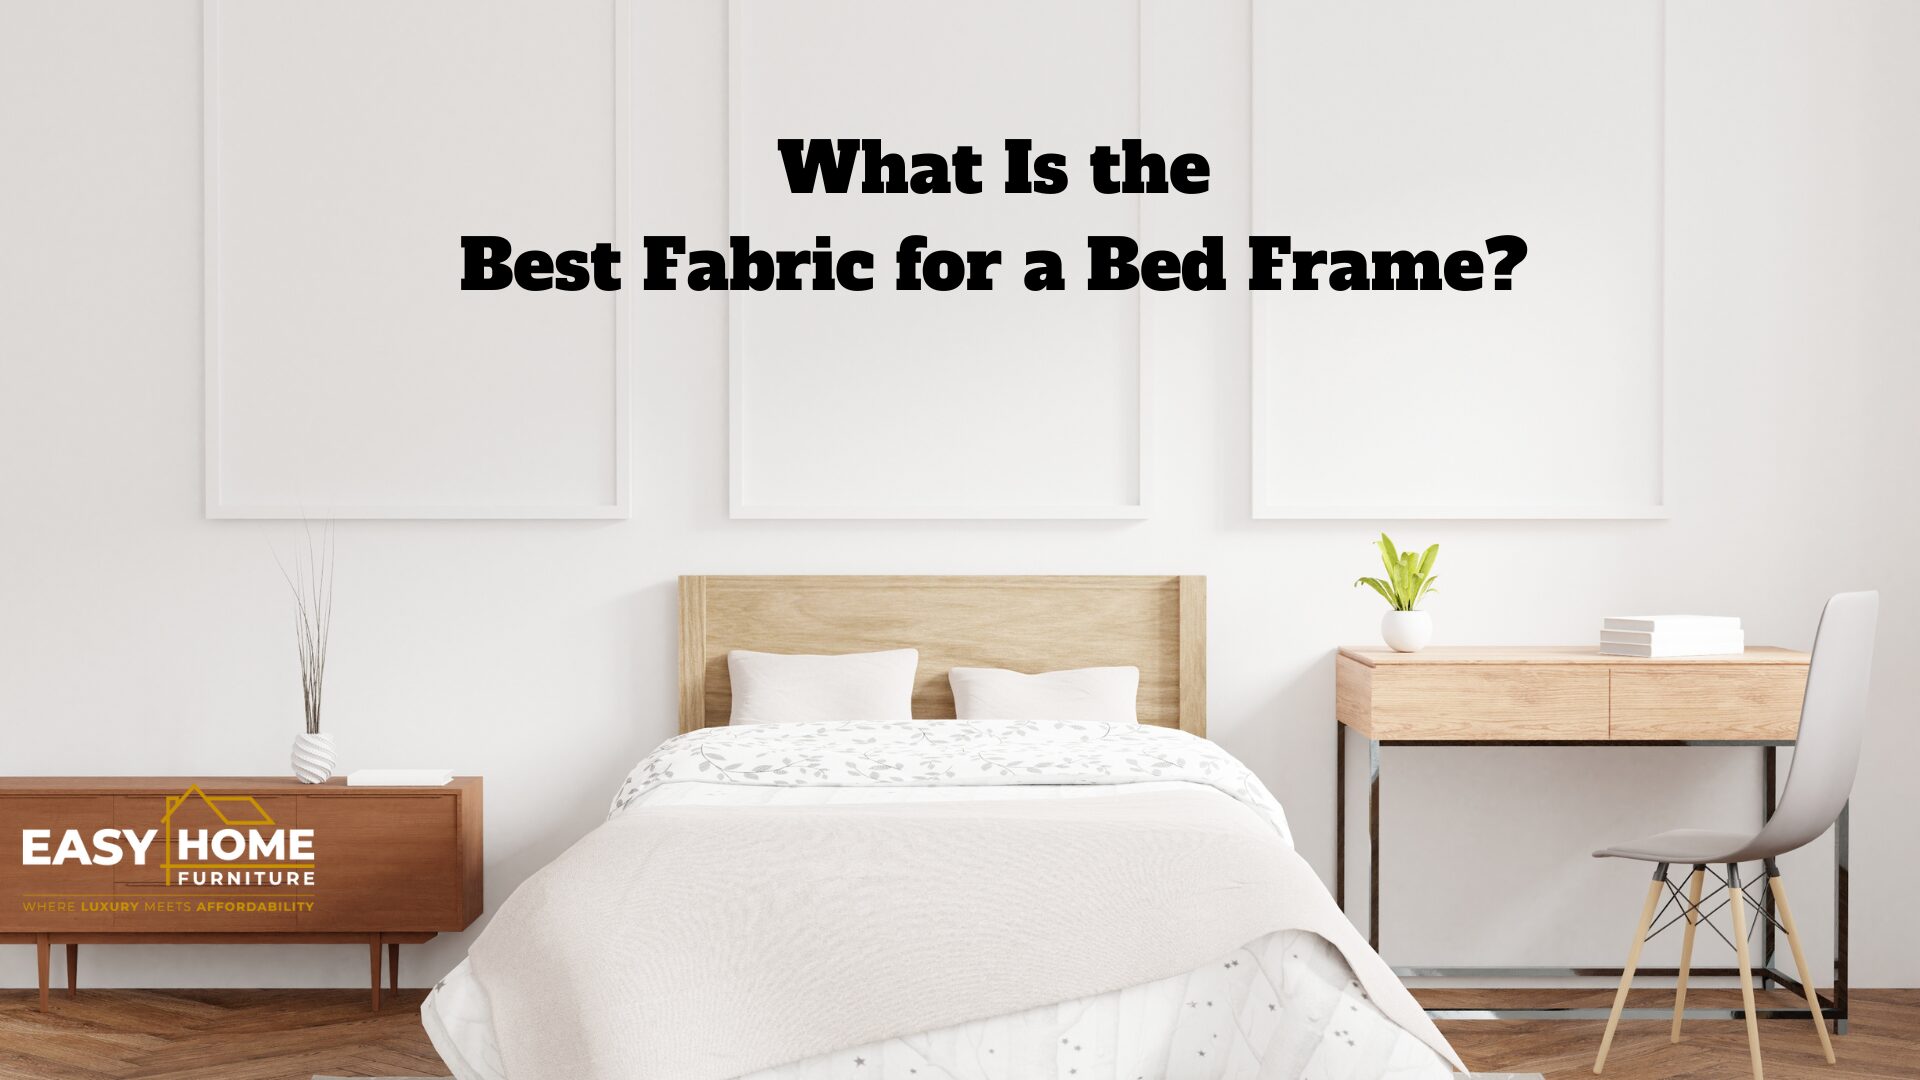 What is the best fabric for a bed frame